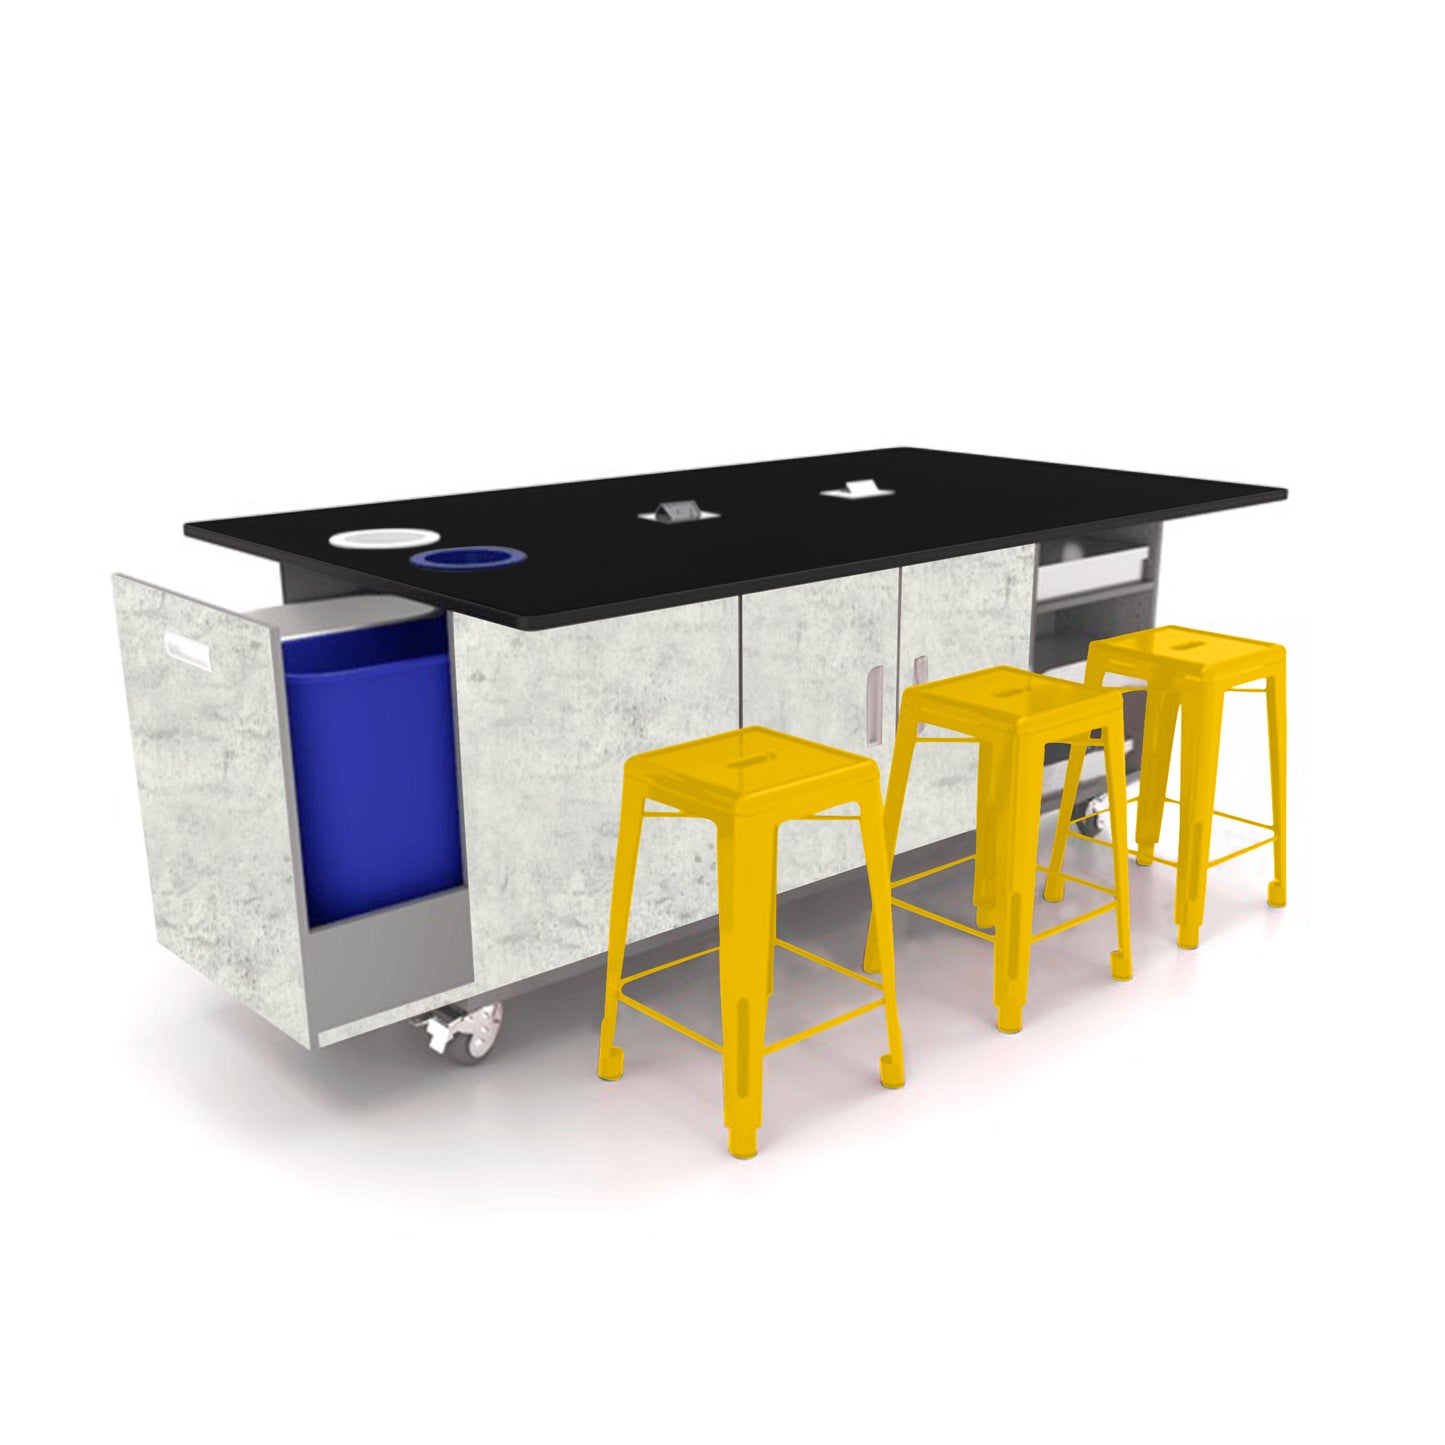 CEF ED Original Table 42"H Tough Top, Laminate Base with  6 Stools, Storage Bins, Trash Bins, and Electrical Outlets Included.